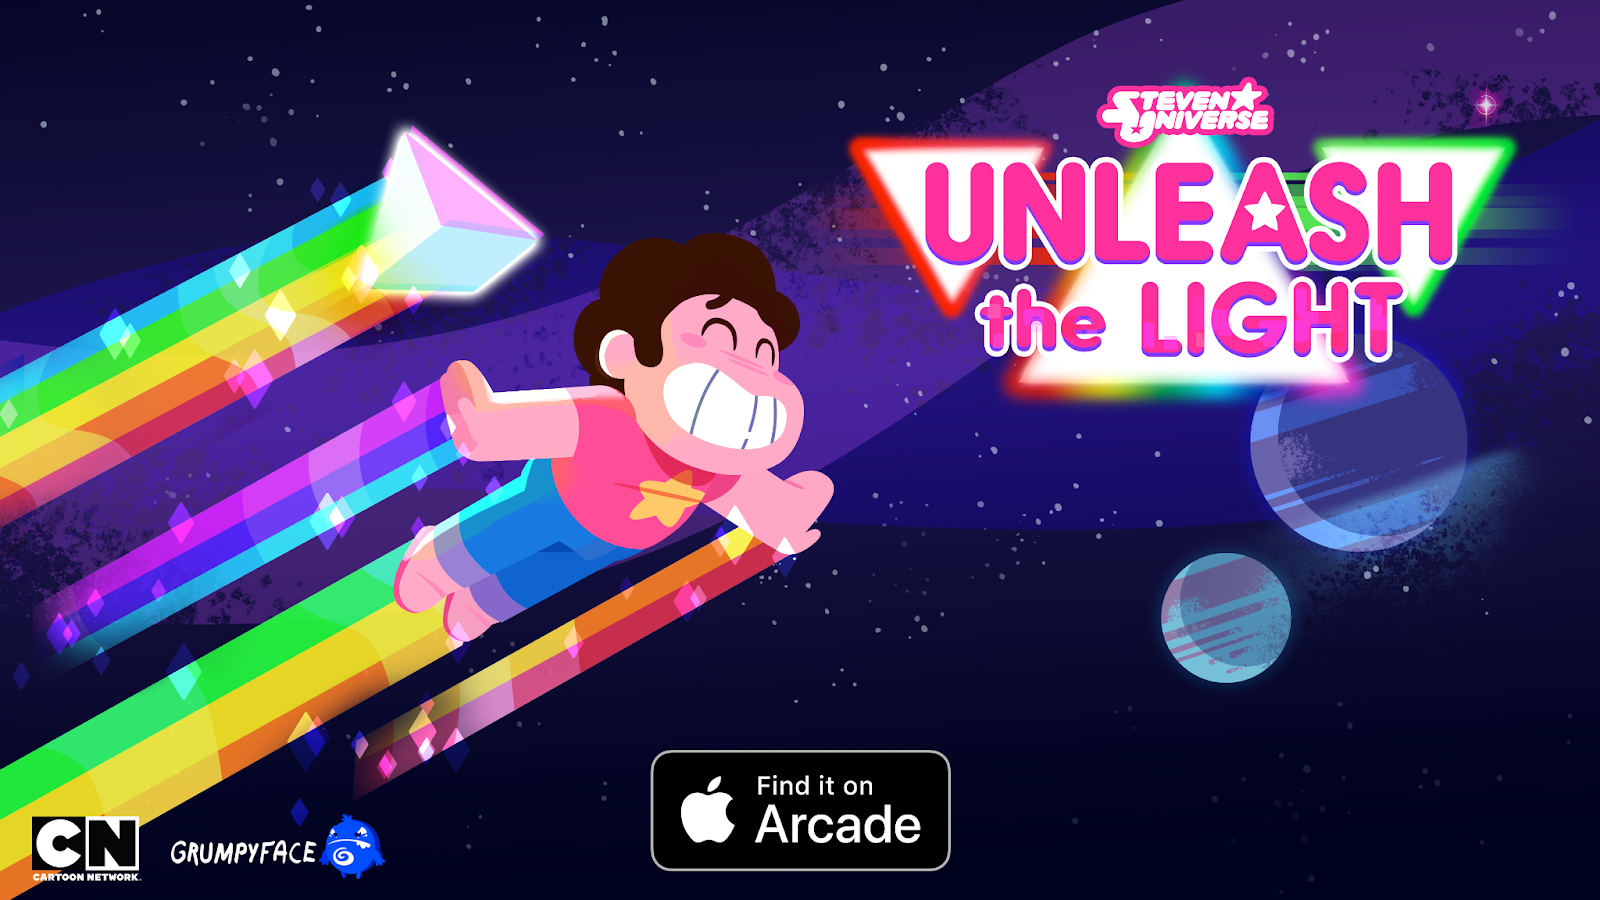 "Steven Universe: the Light" Available now on Apple Arcade!